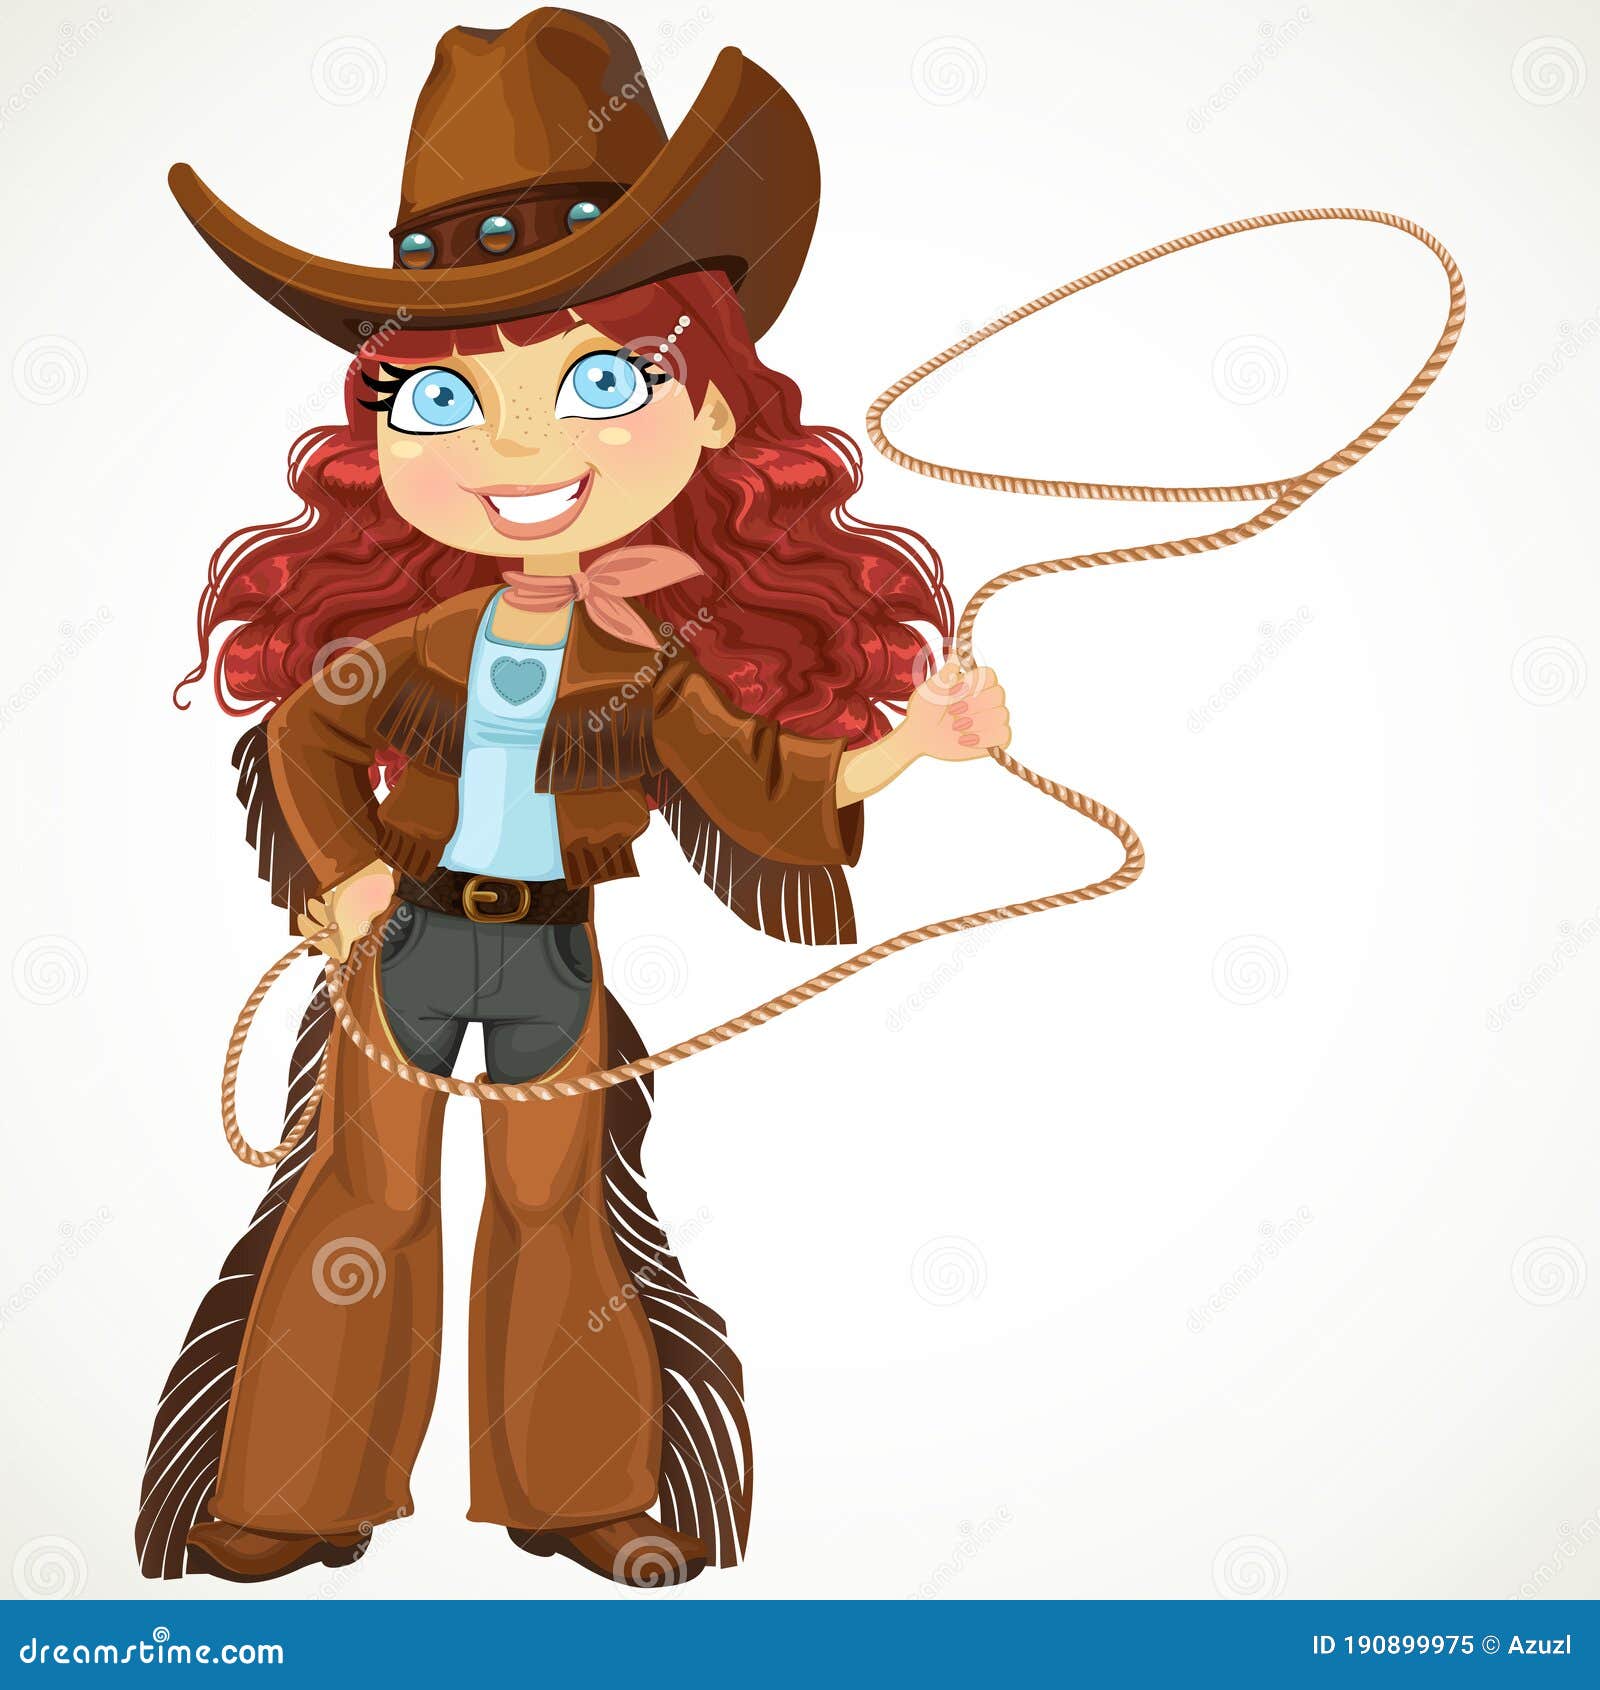 https://thumbs.dreamstime.com/z/brunette-curly-hair-cowgirl-lasso-isolated-white-brunette-curly-hair-cowgirl-lasso-isolated-white-background-190899975.jpg